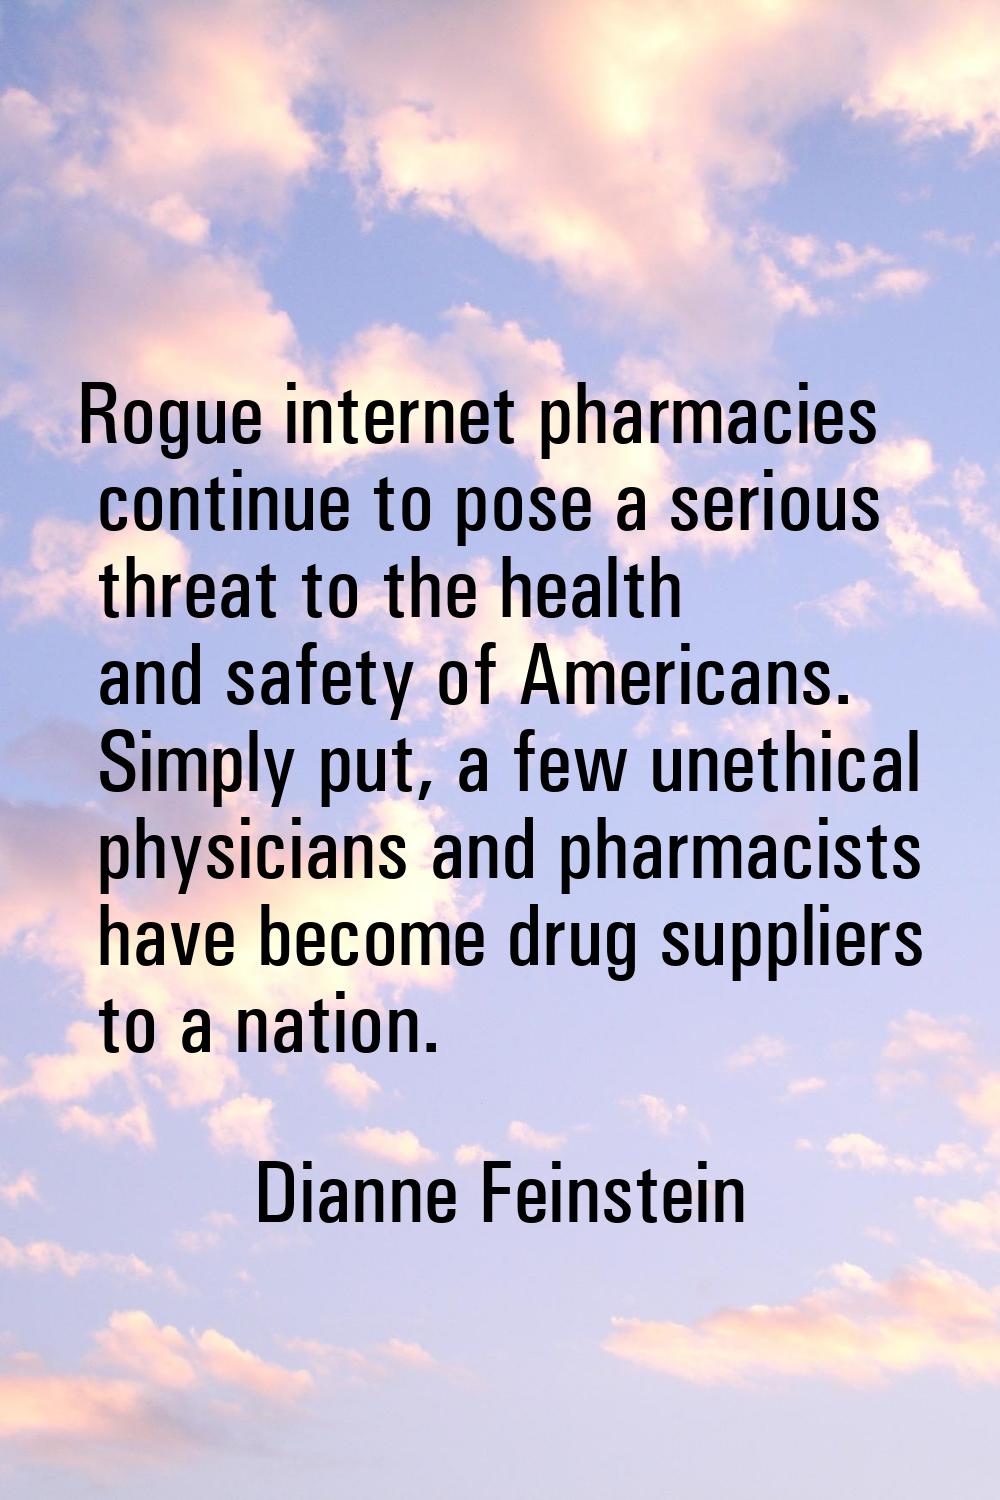 Rogue internet pharmacies continue to pose a serious threat to the health and safety of Americans. 